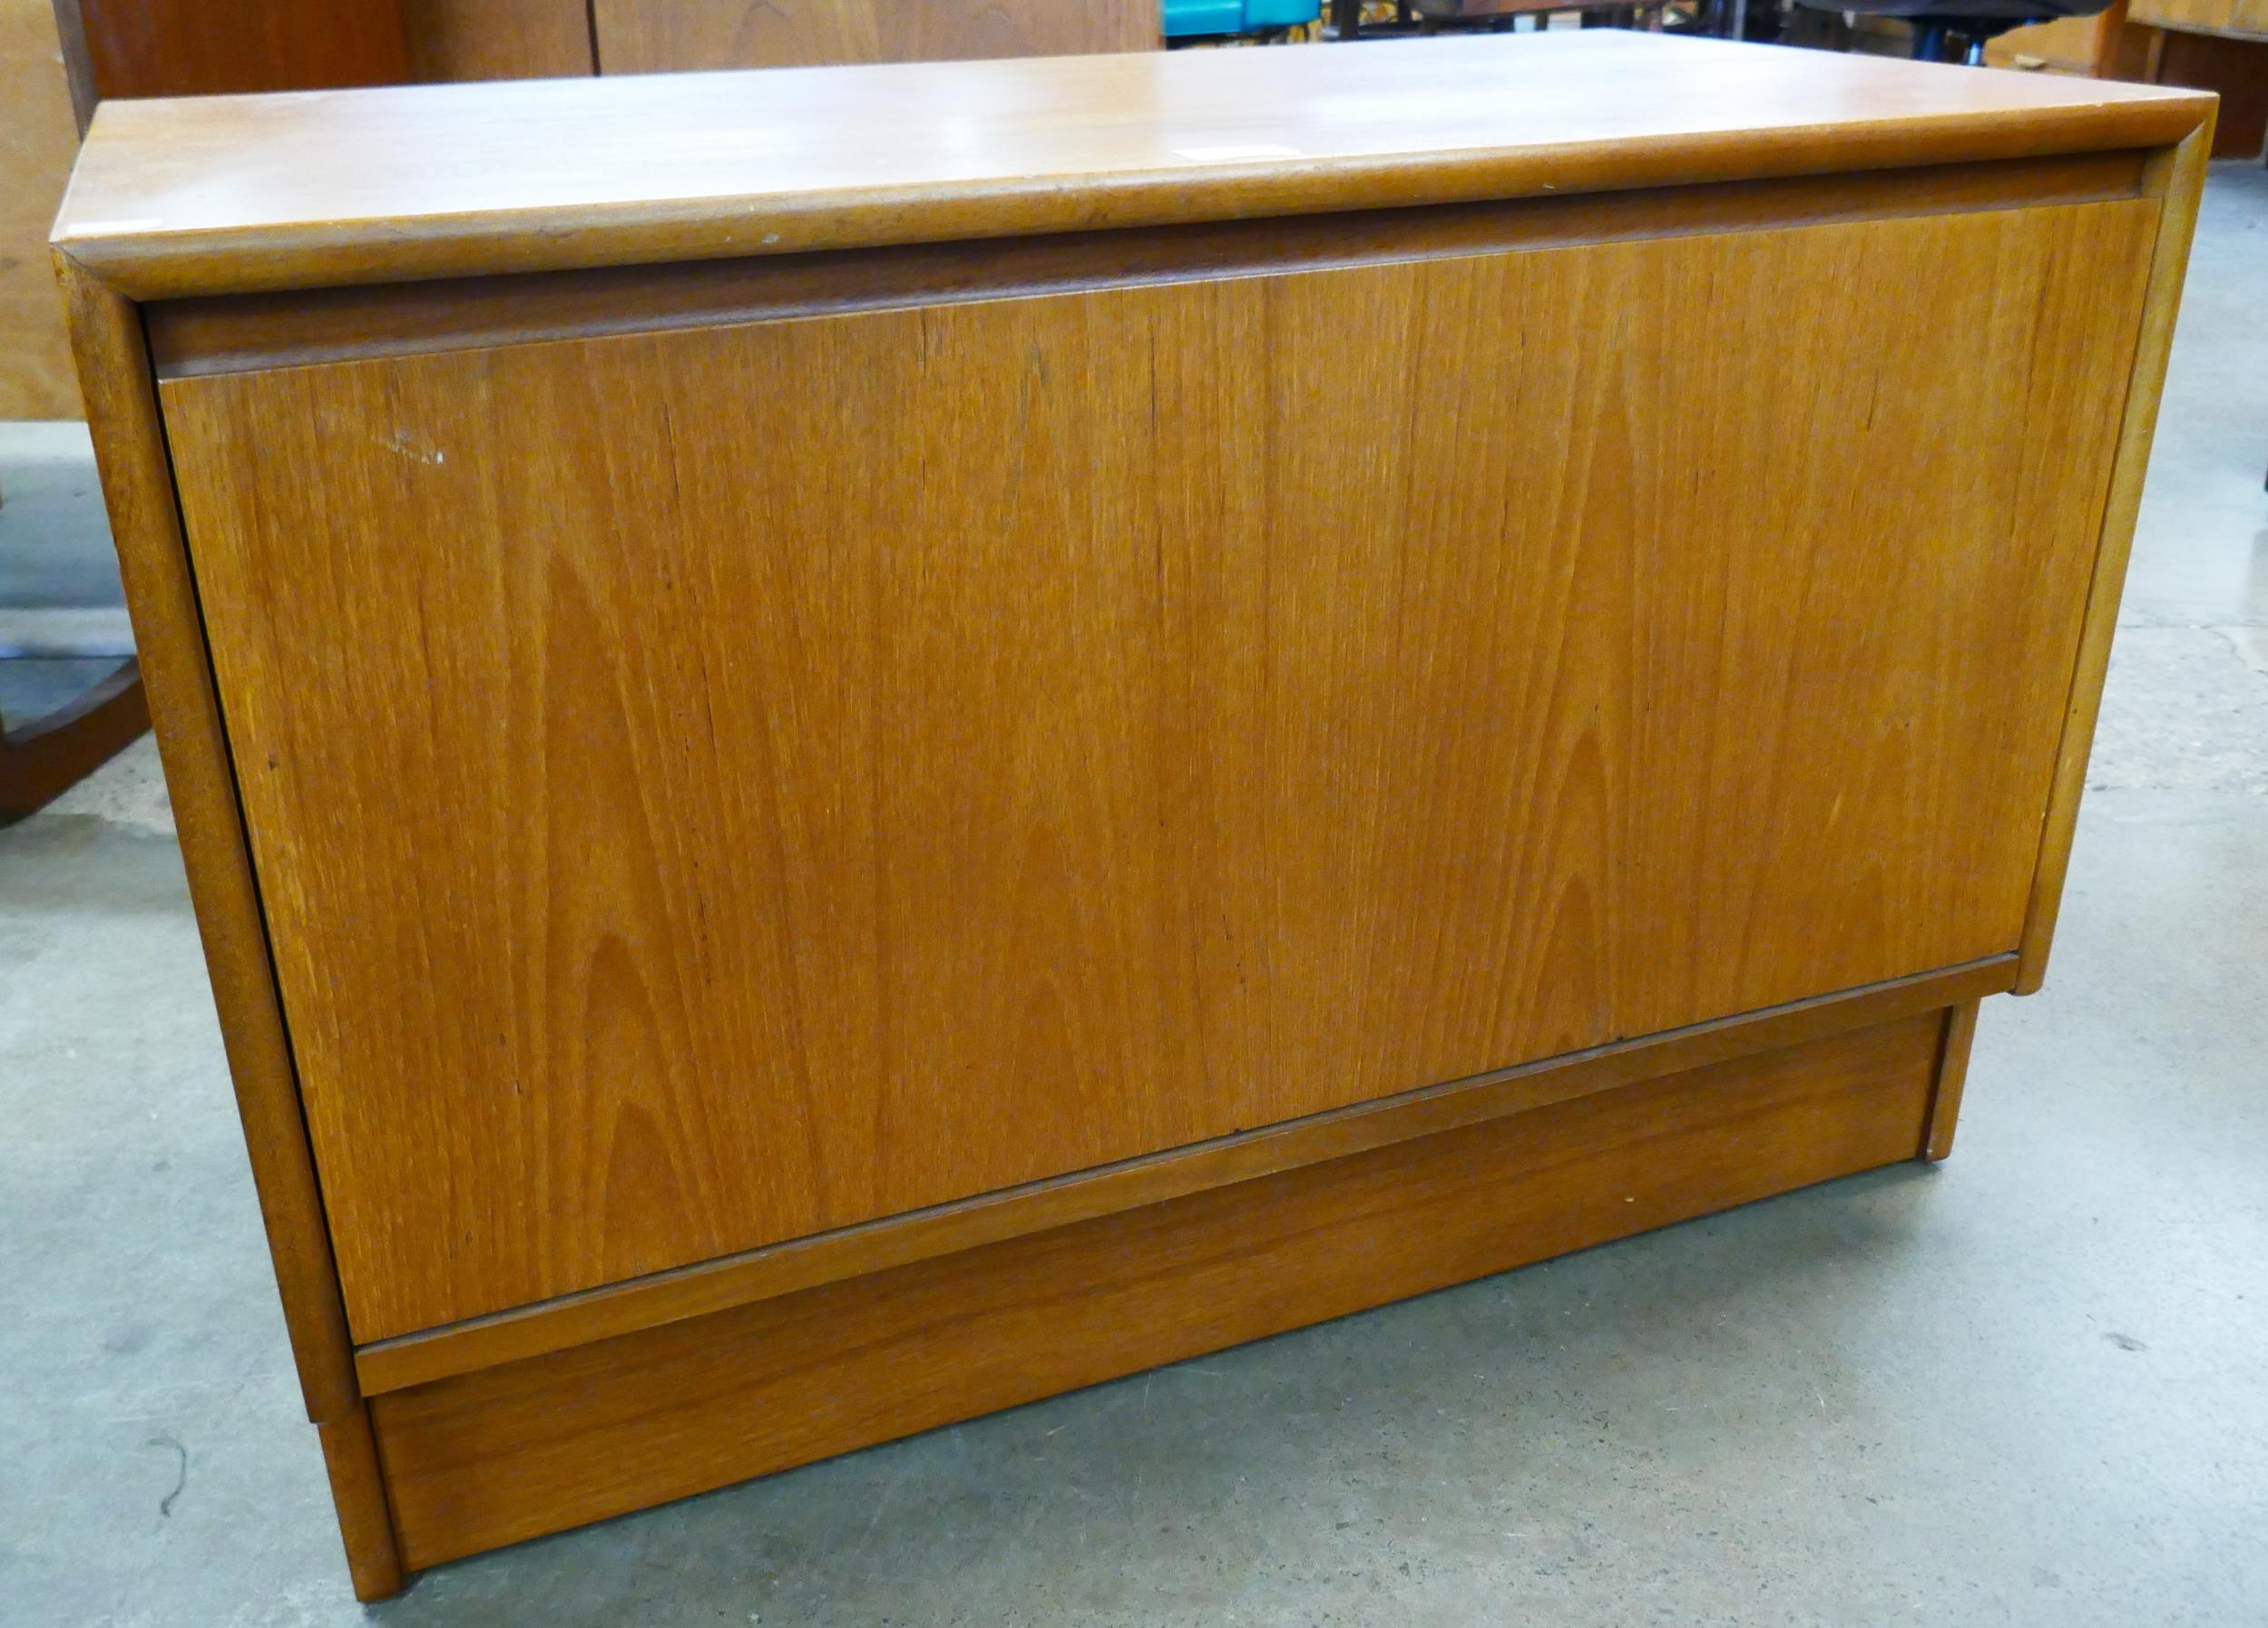 A small teak cabinet